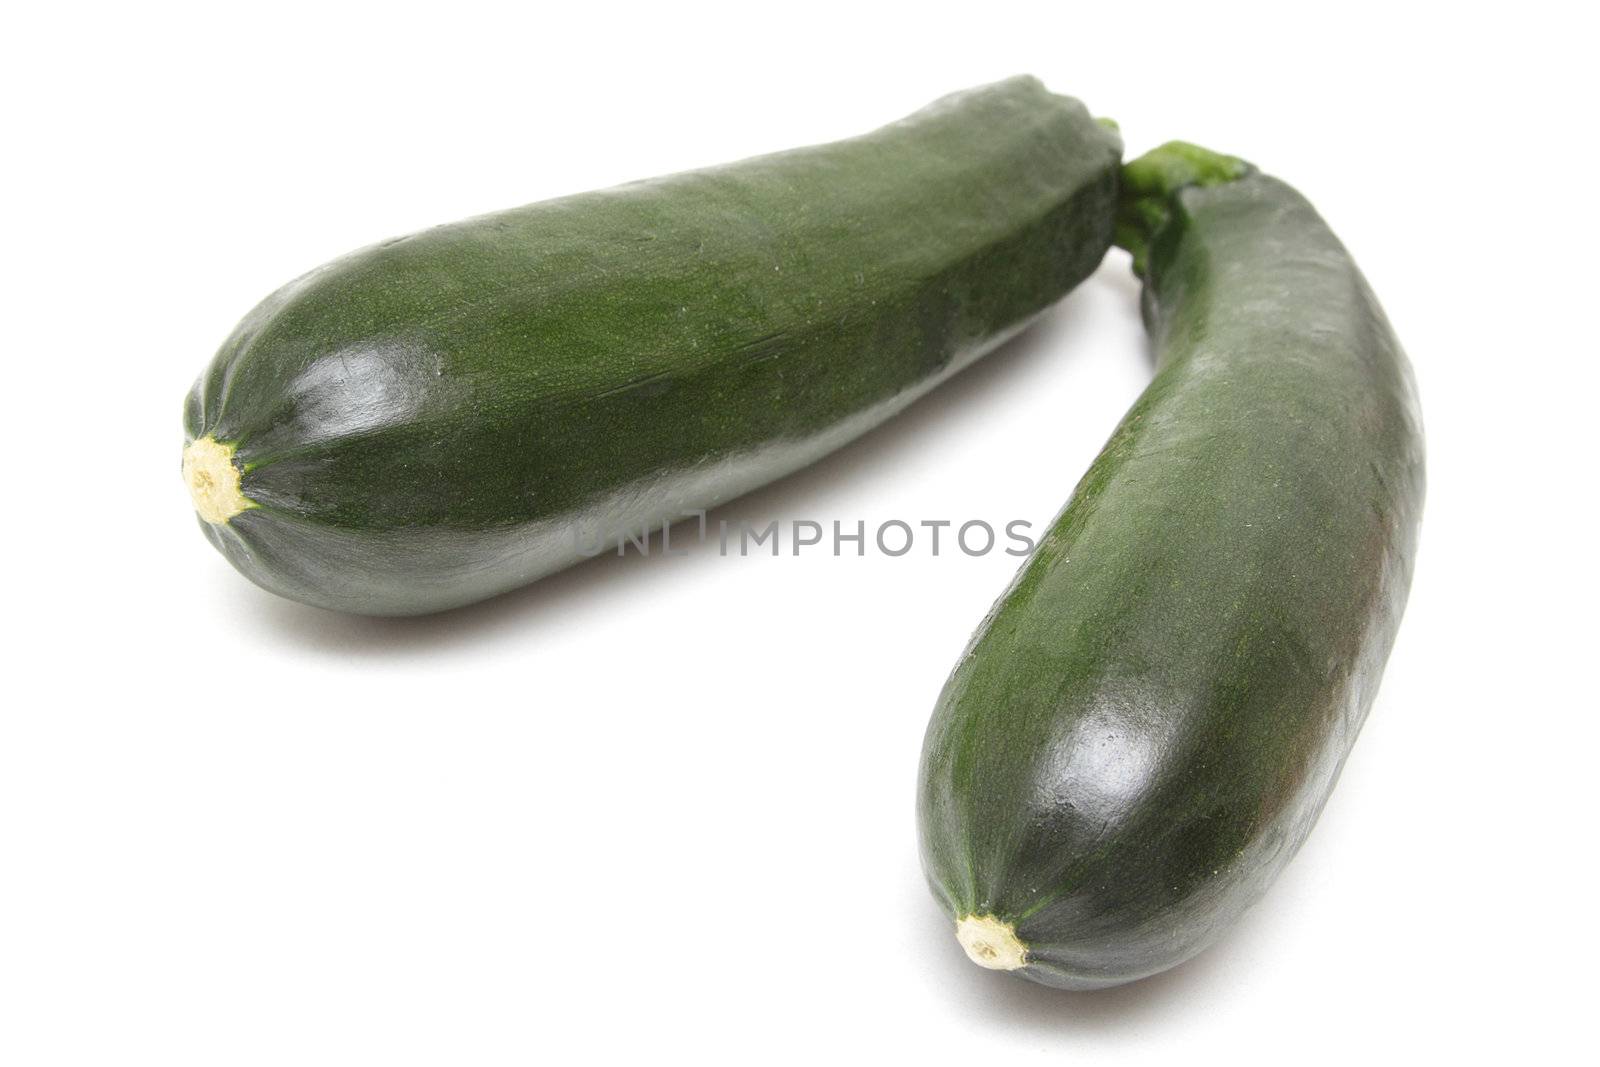 Two green zucchini isolated on white background